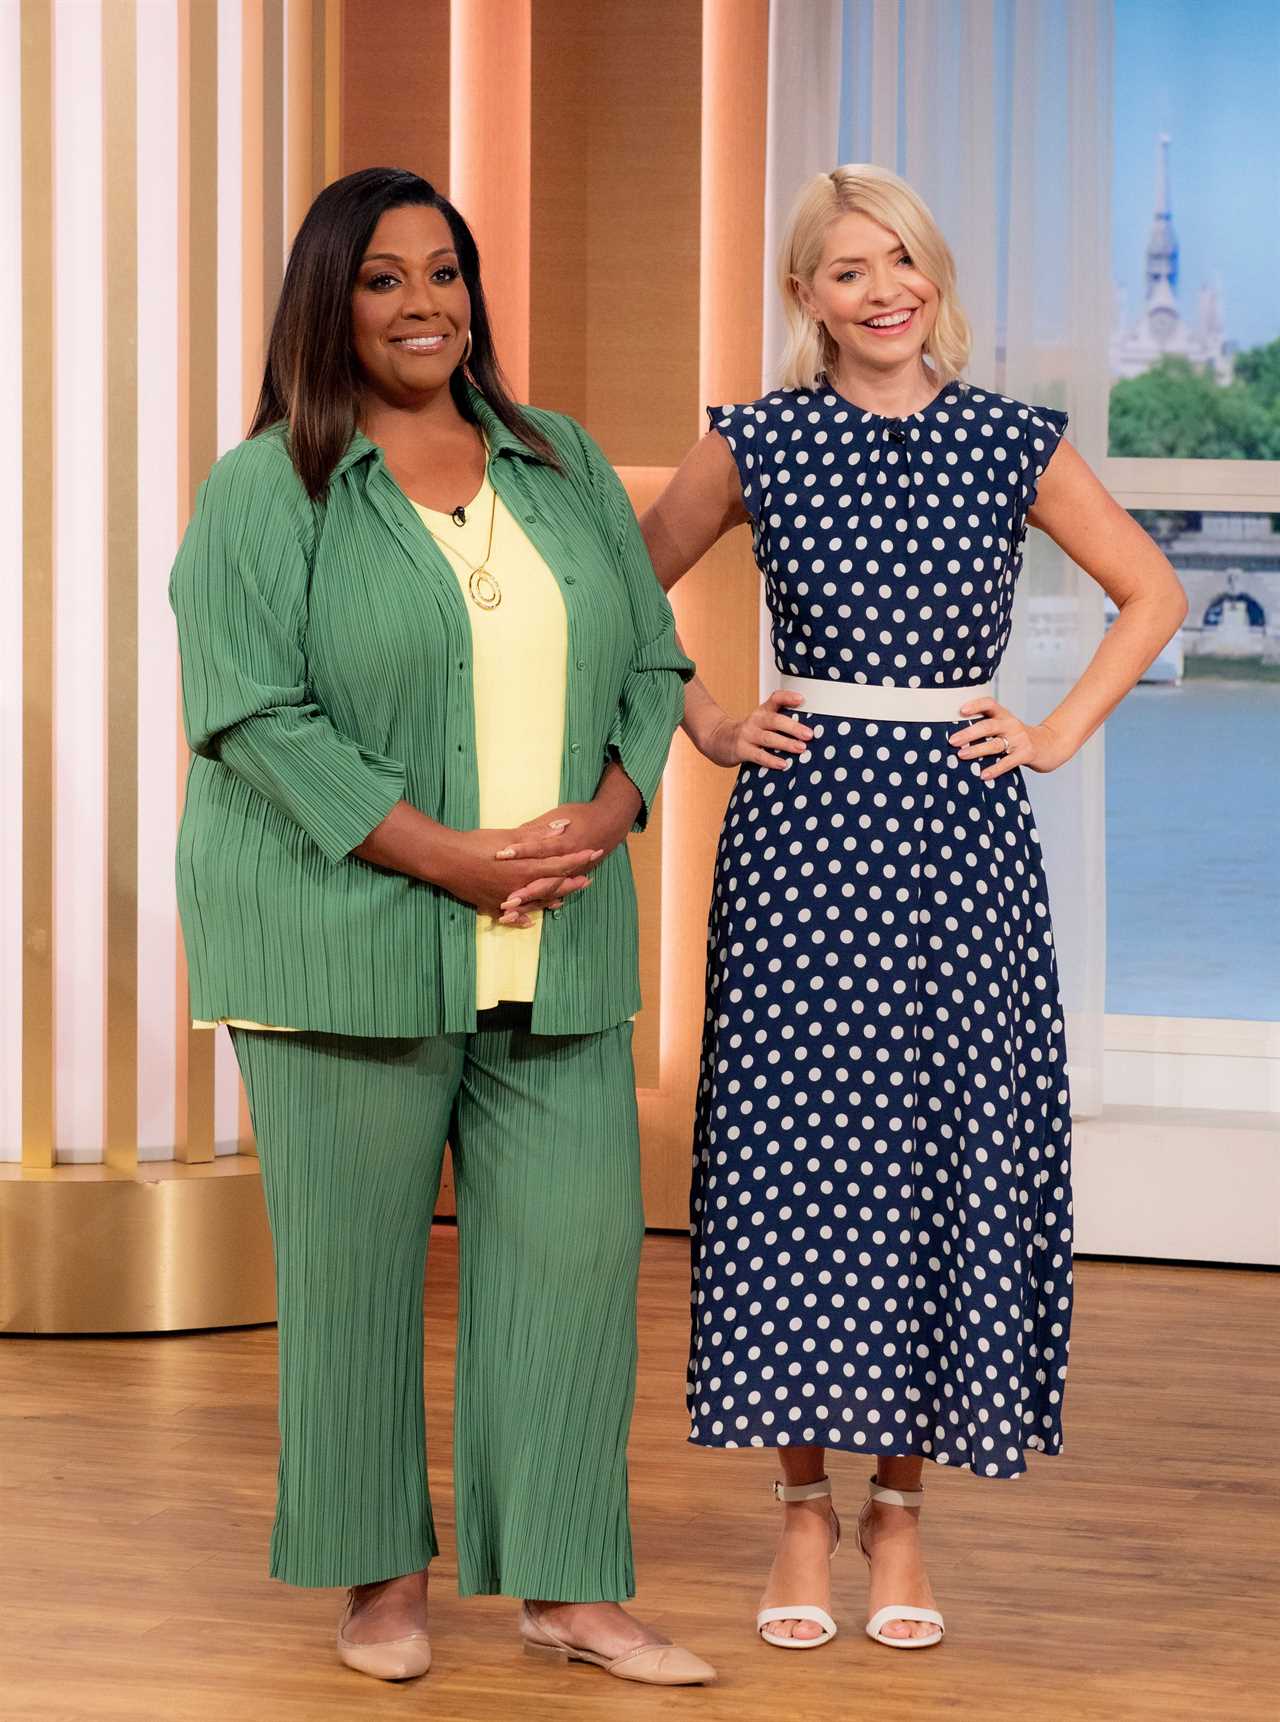 This Morning to Undergo Complete Revamp Following Holly Willoughby's Departure